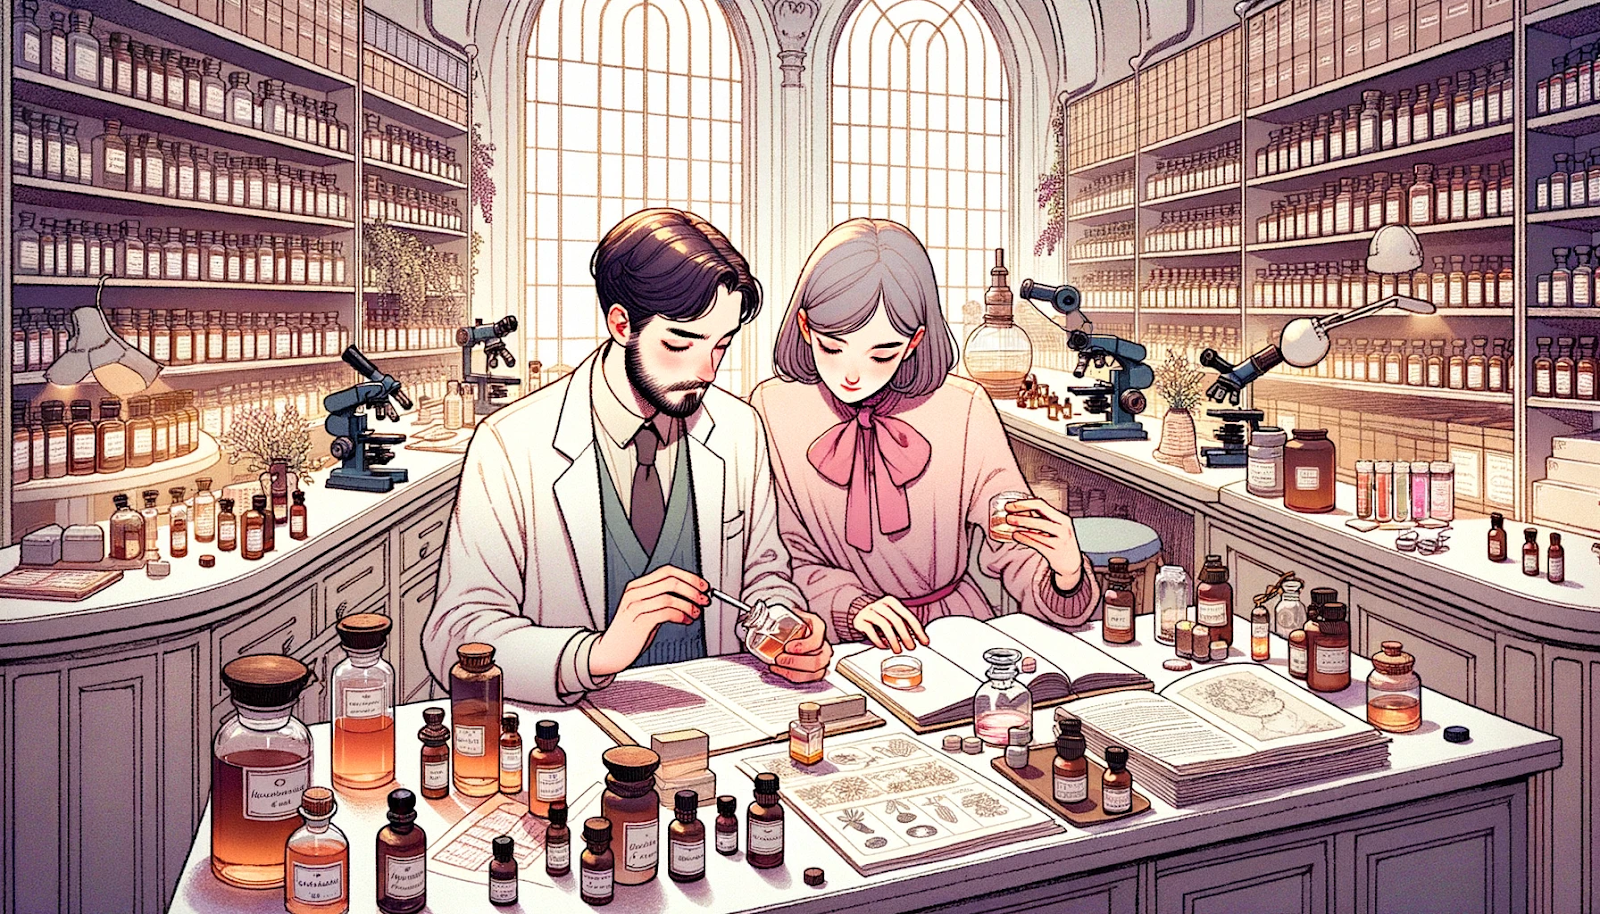 Illustration of Amelie and Julien working together in the transformed perfumery. The room is filled with research papers, ingredients, and scent samples. They are deeply engrossed in their work, with Julien holding a vial and Amelie noting down observations. The atmosphere is one of collaboration and discovery.